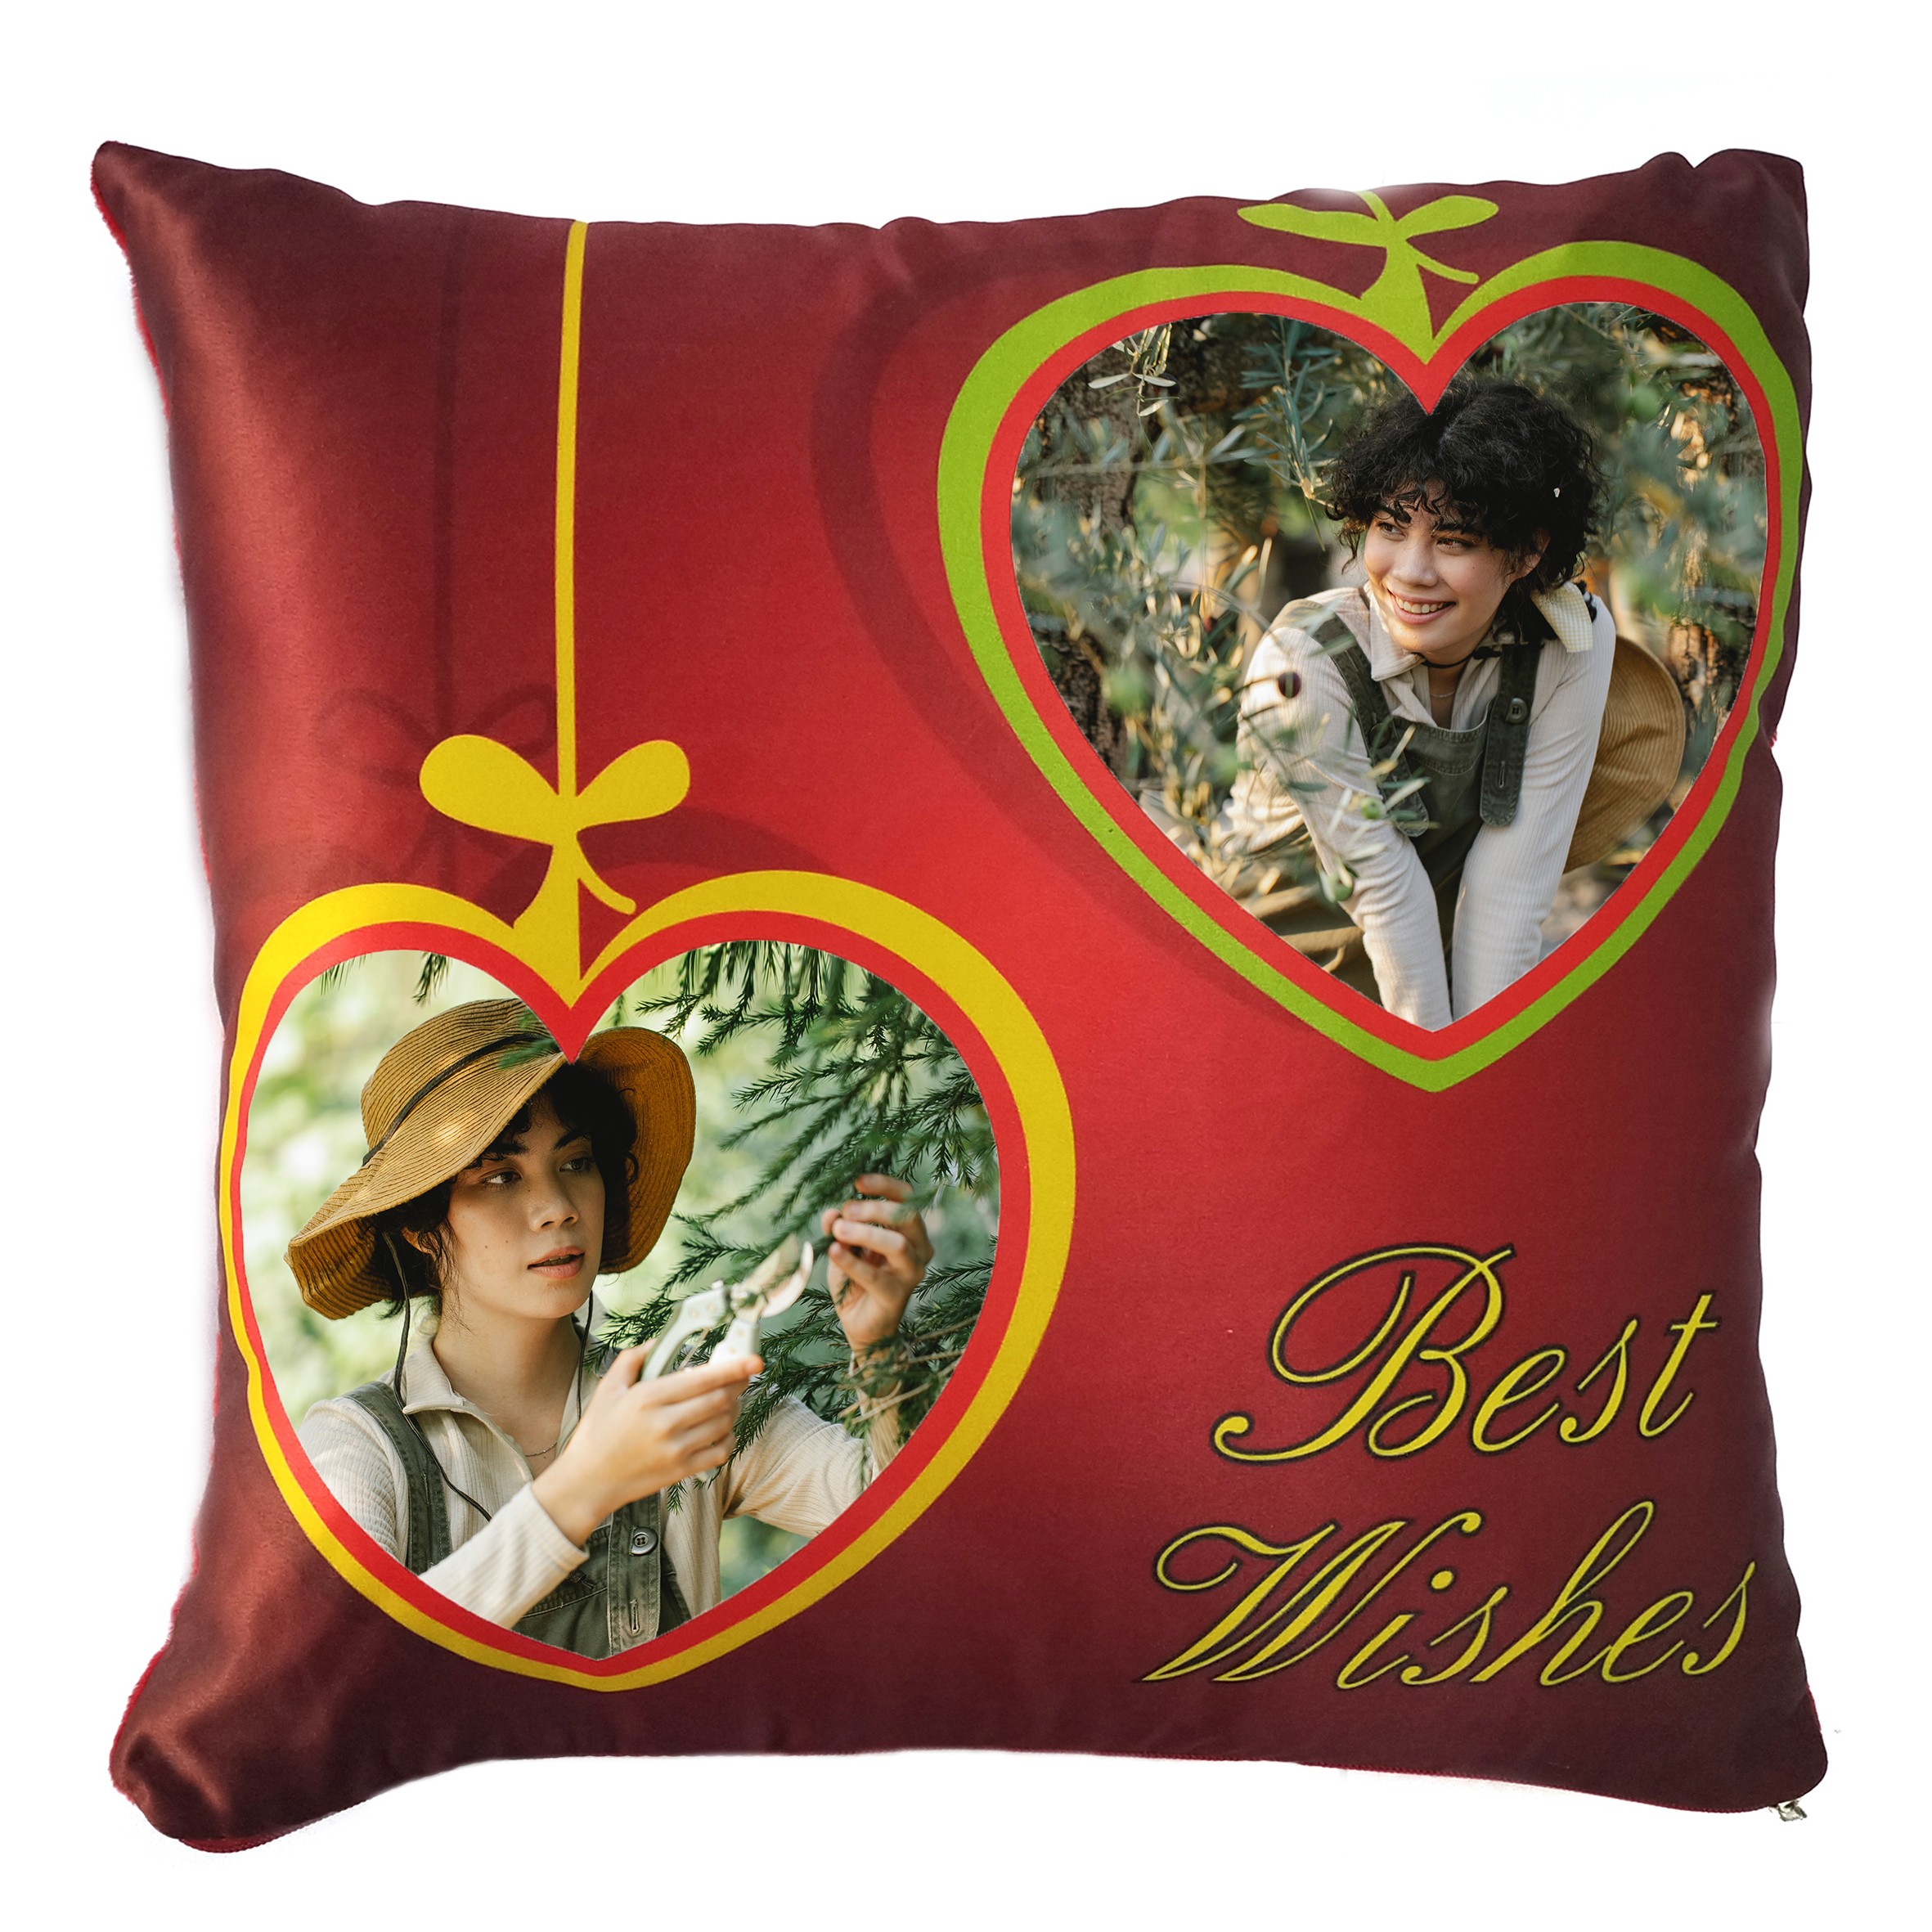 Square Shape Personalized Photo Printed Cushion (Best Wishes with Two Big Heart Design Pre Printed)